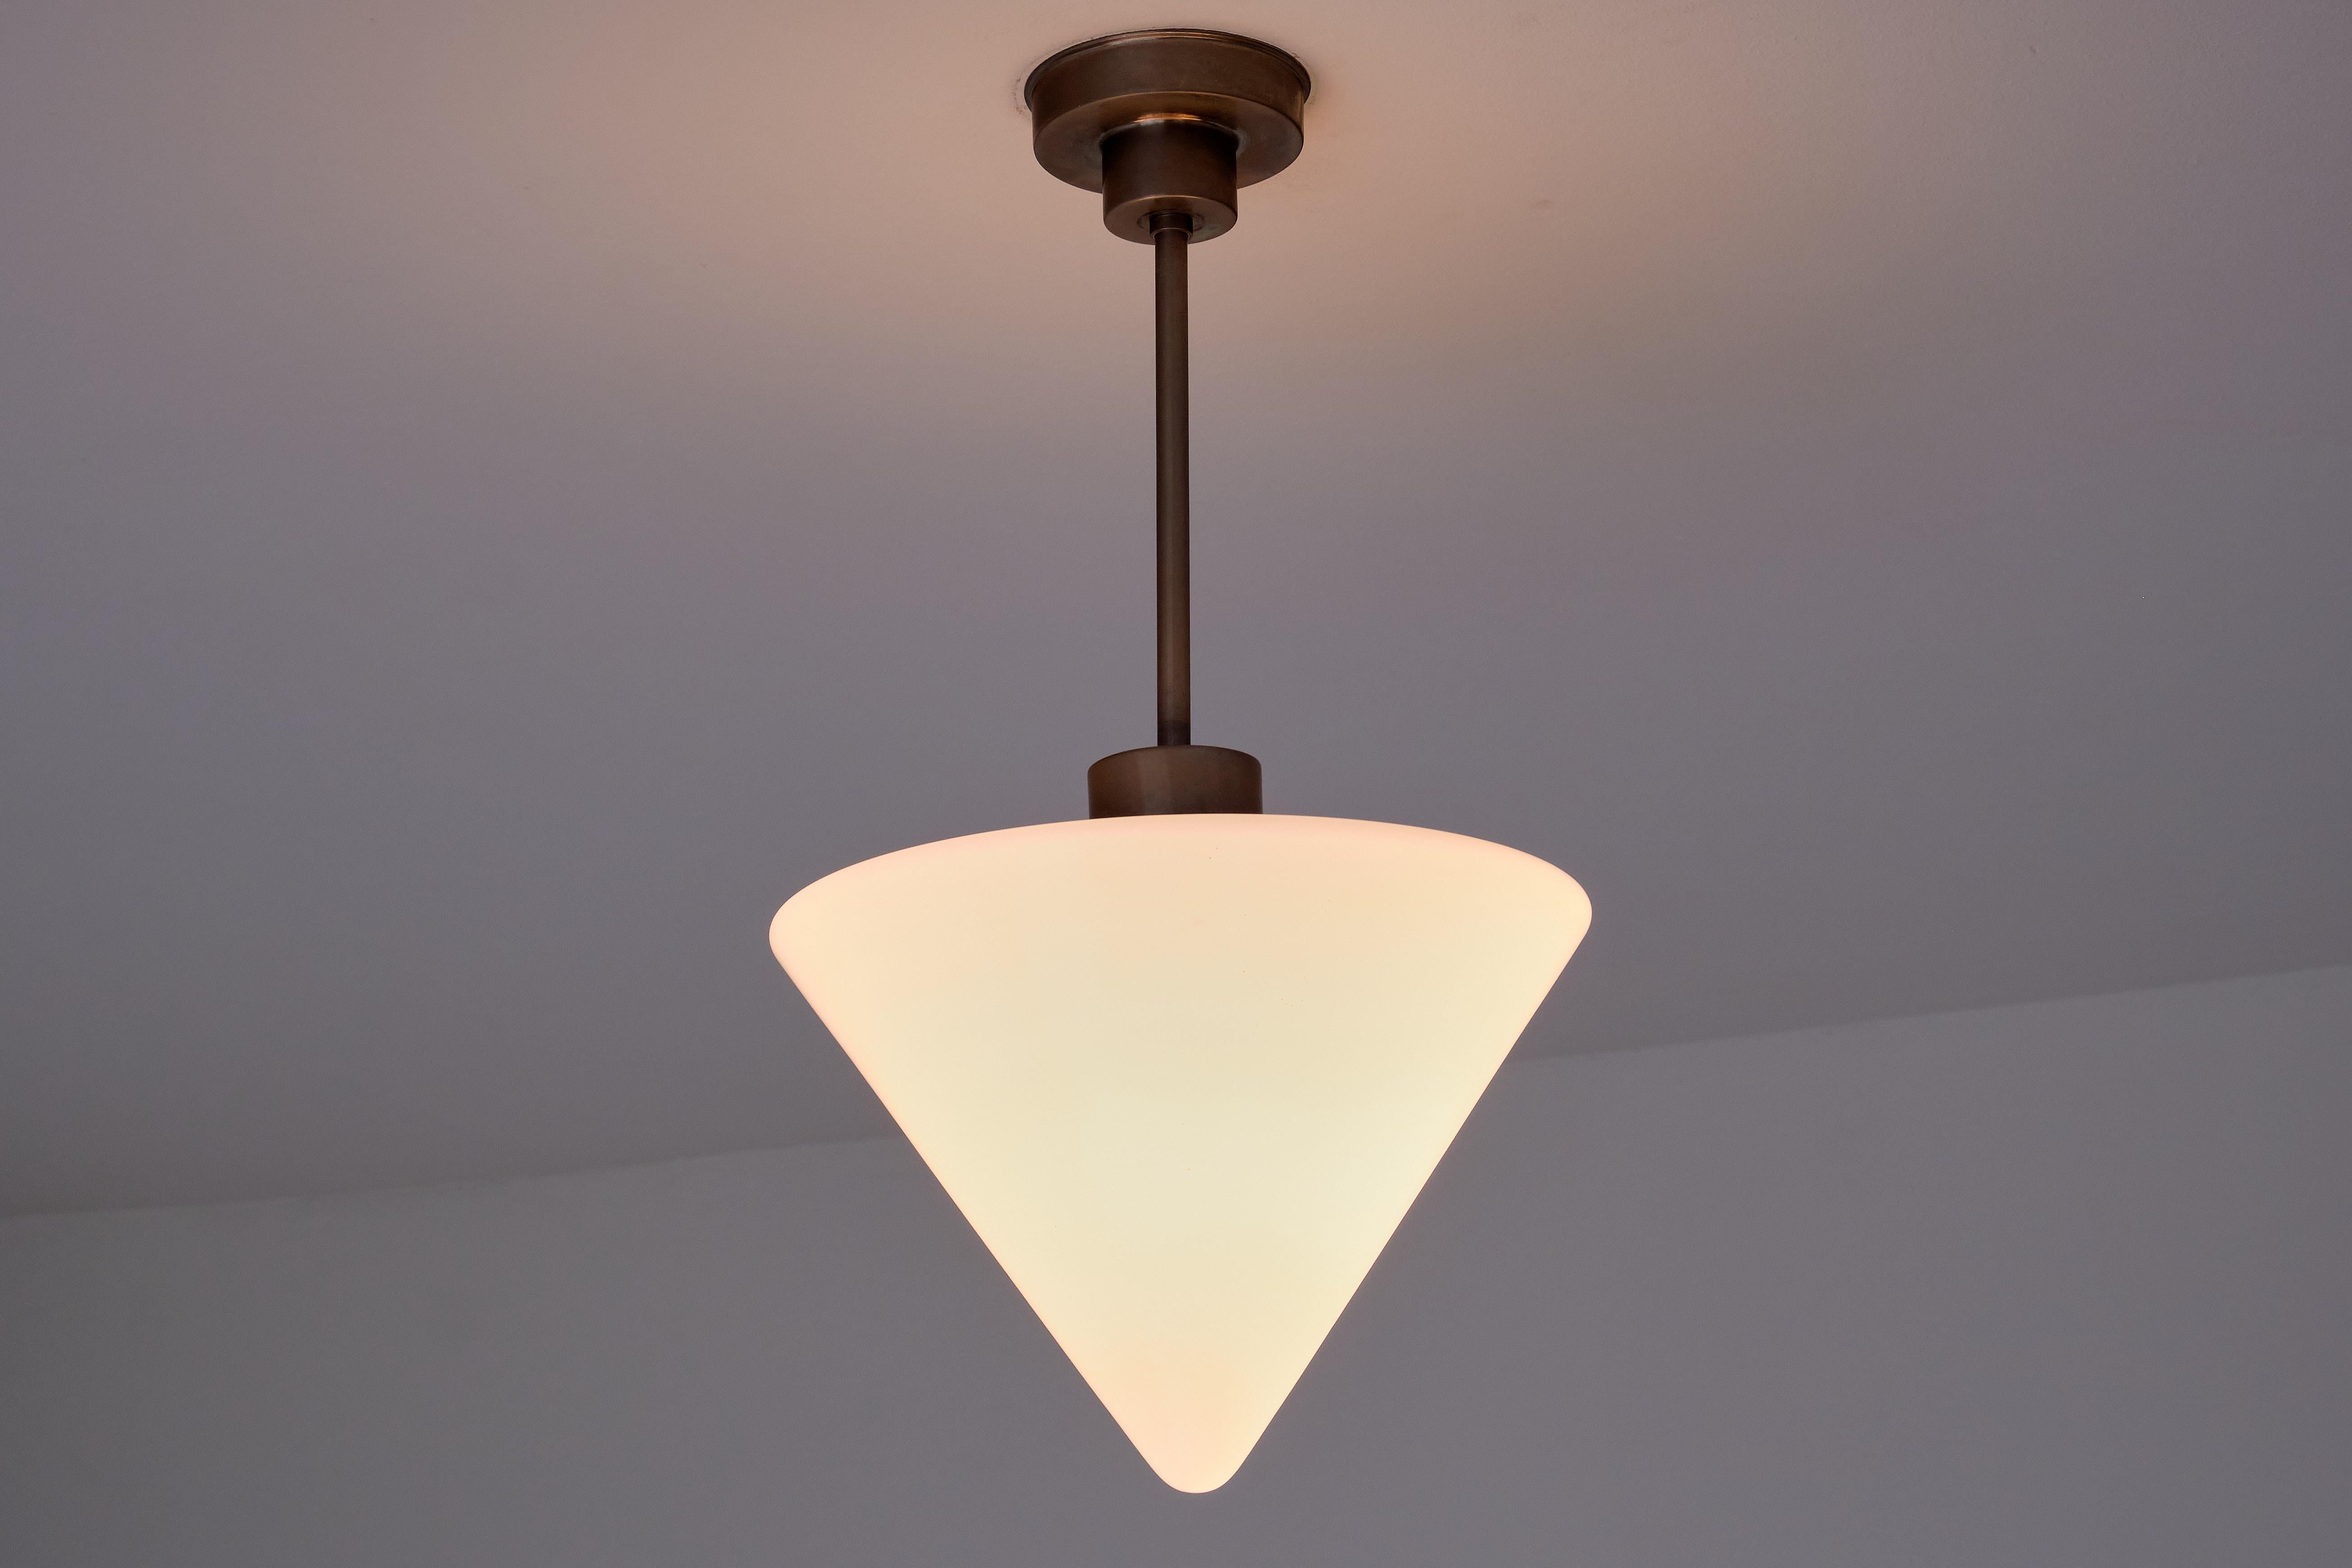 Dutch Gispen Cone Shaped Pendant Light in Opal Glass and Nickel, Netherlands, 1930s For Sale